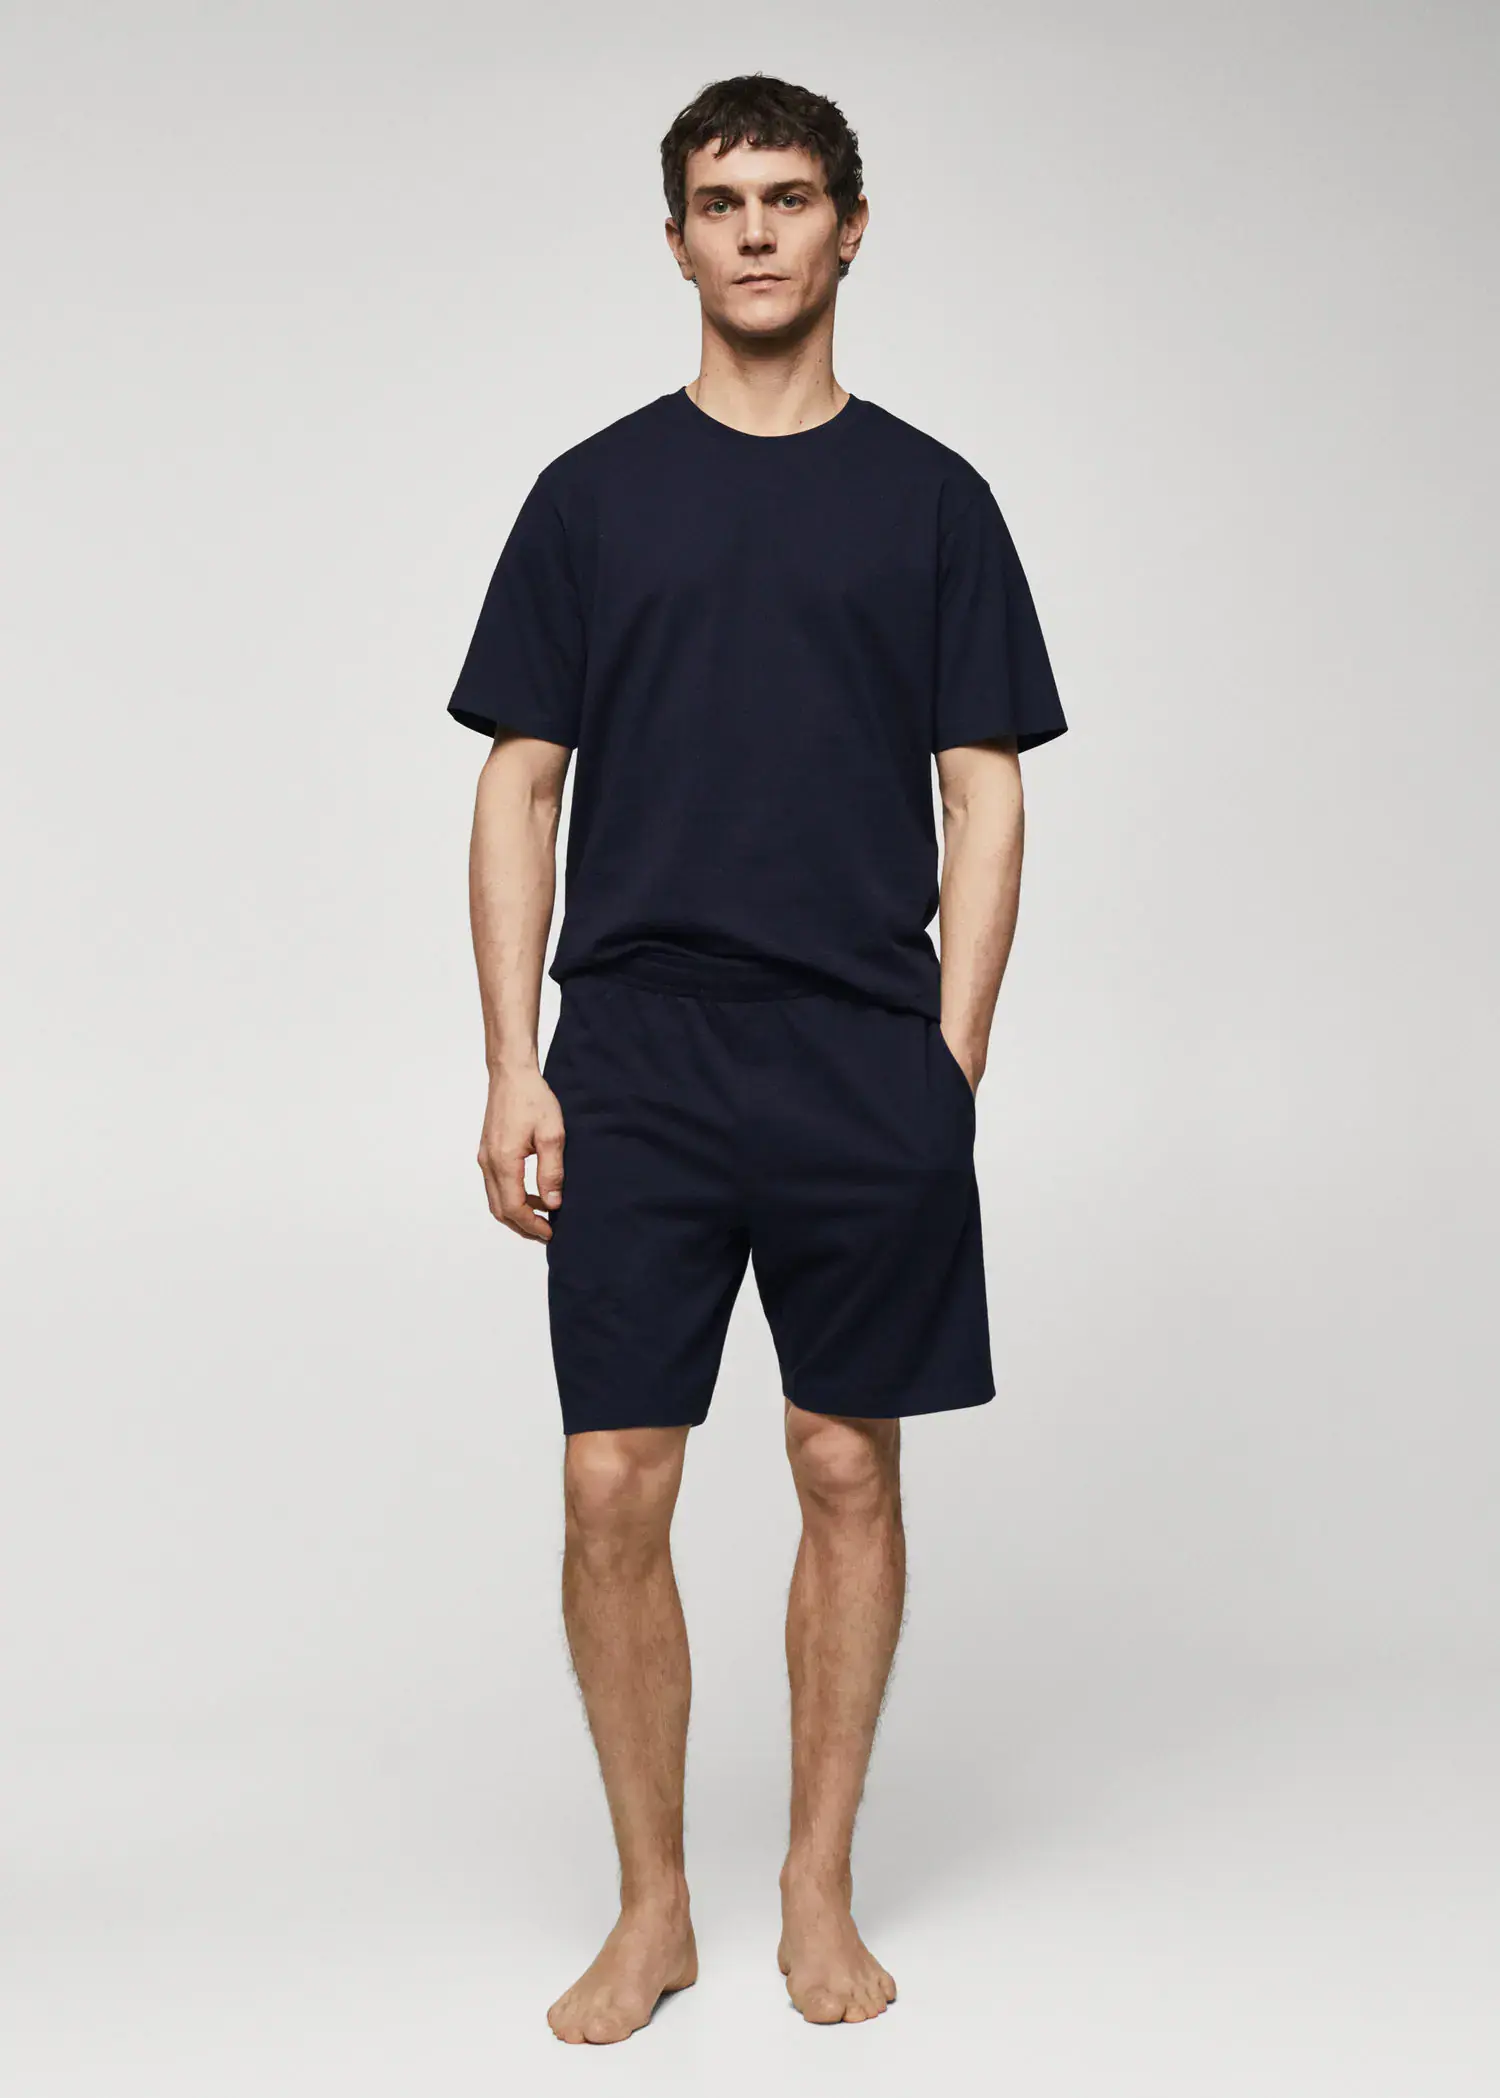 Mango Cotton pajama shorts pack. a man in black shirt and shorts standing next to a wall. 